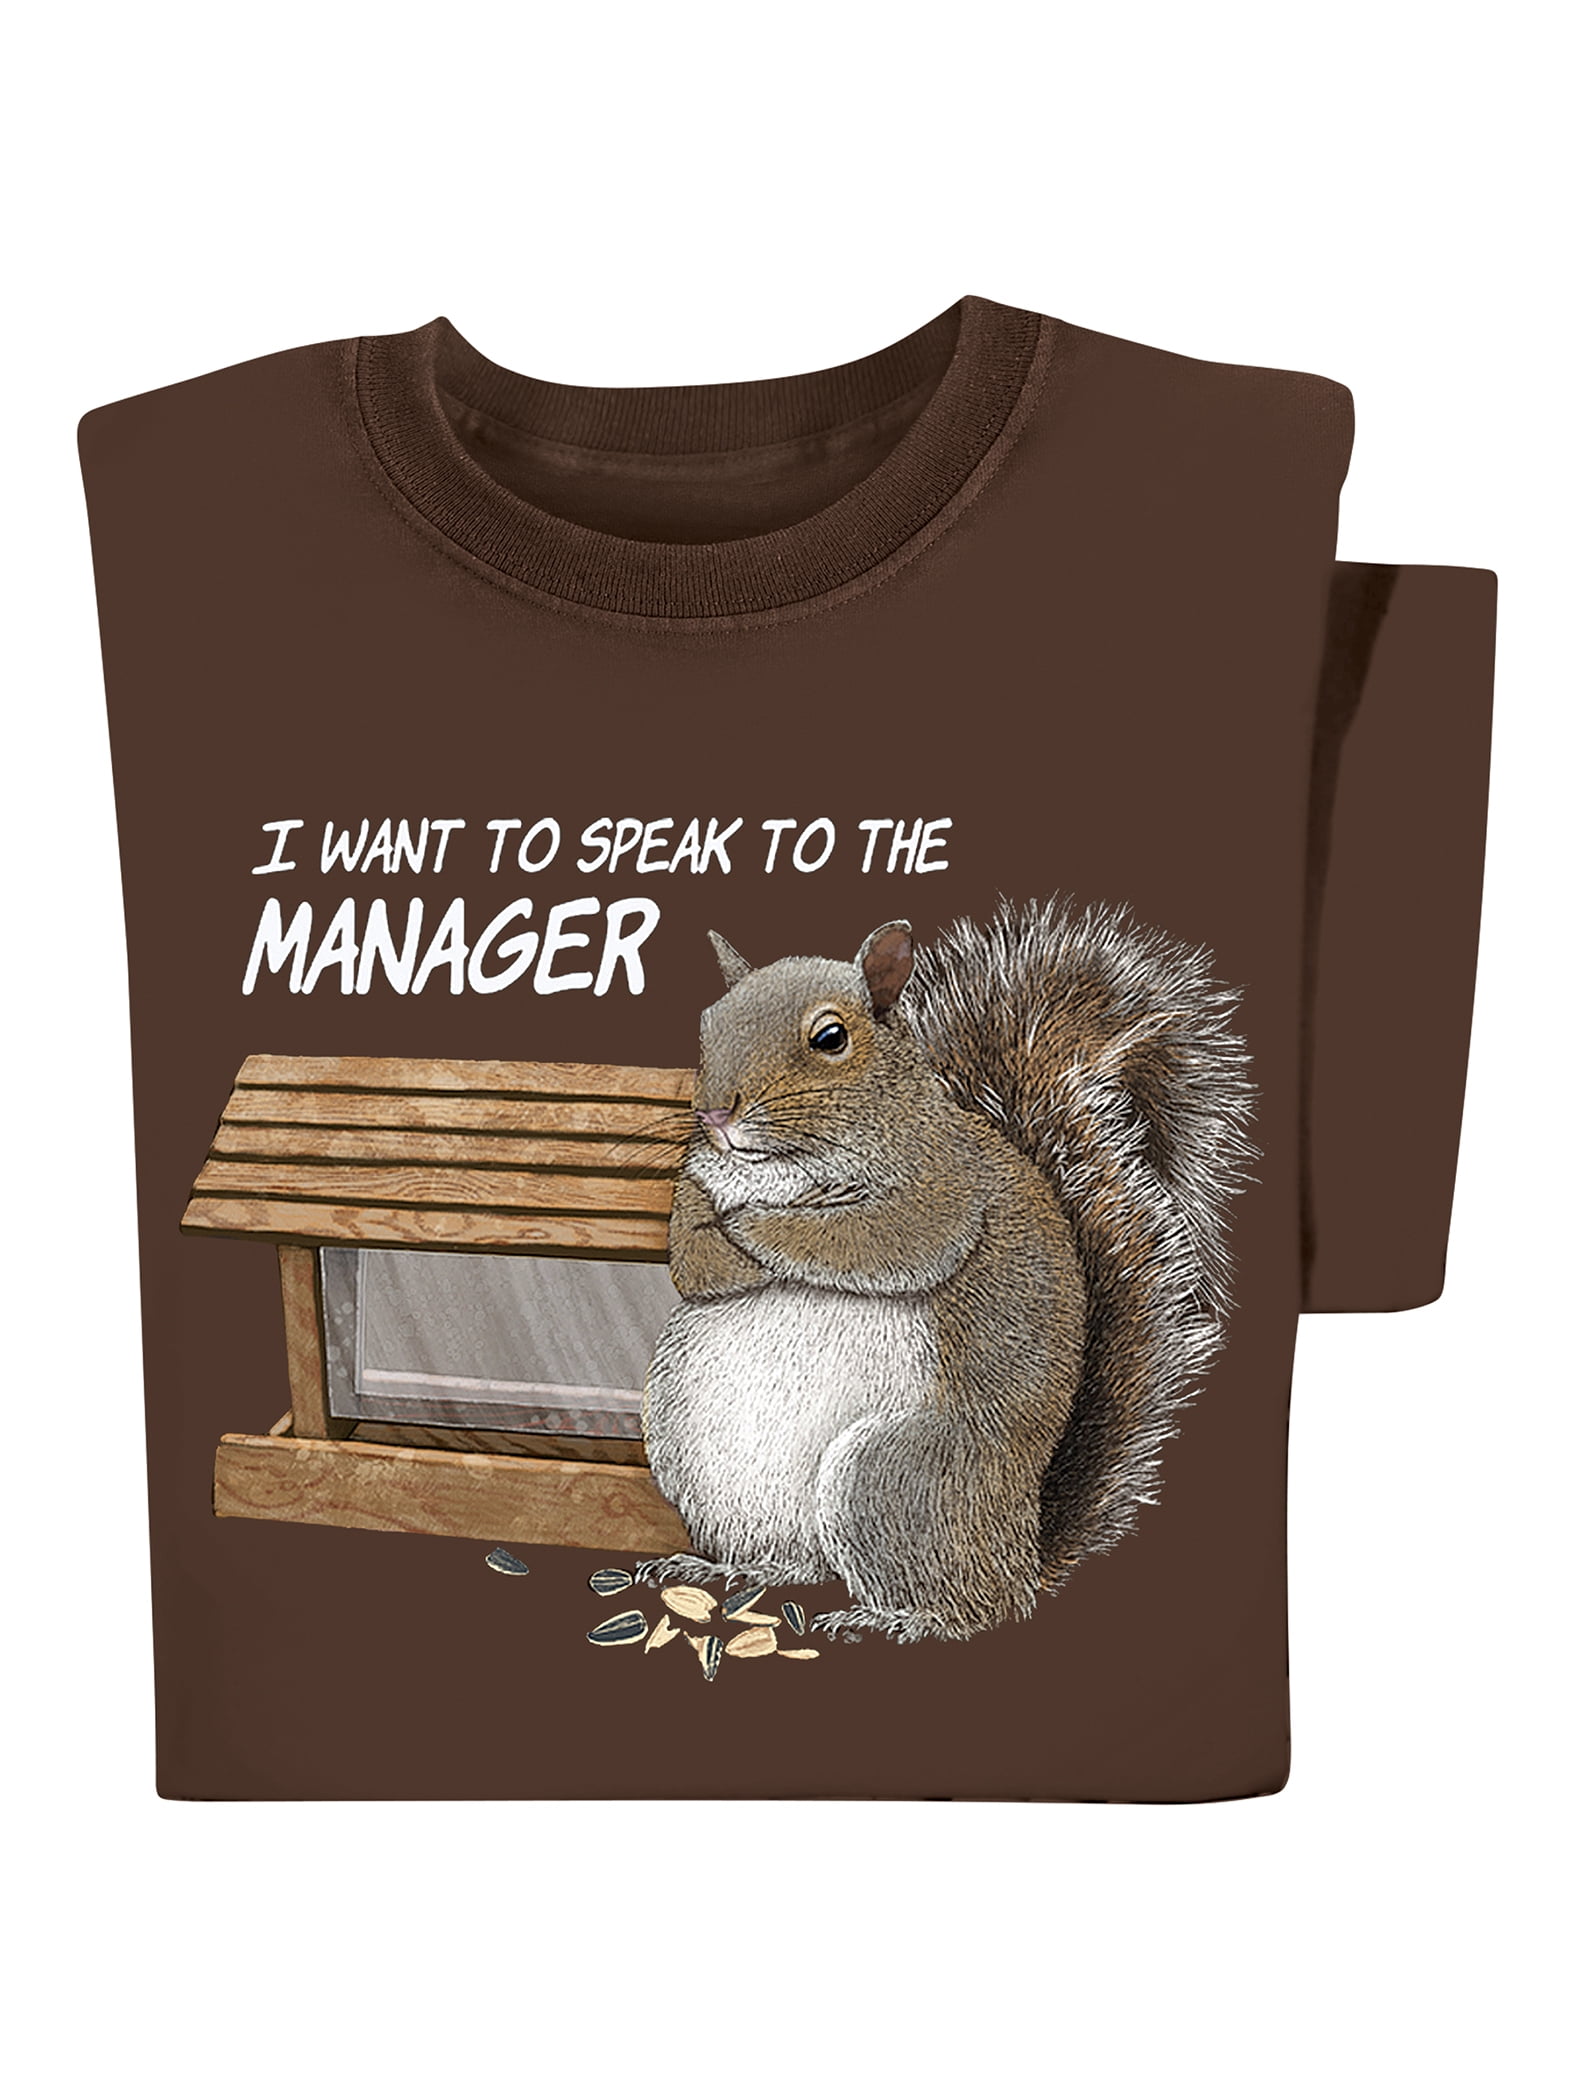 Squirrel Portrait Accessories Face Mask  Marty Mouse House Shop of Shirts,  Coffee Holes Etc